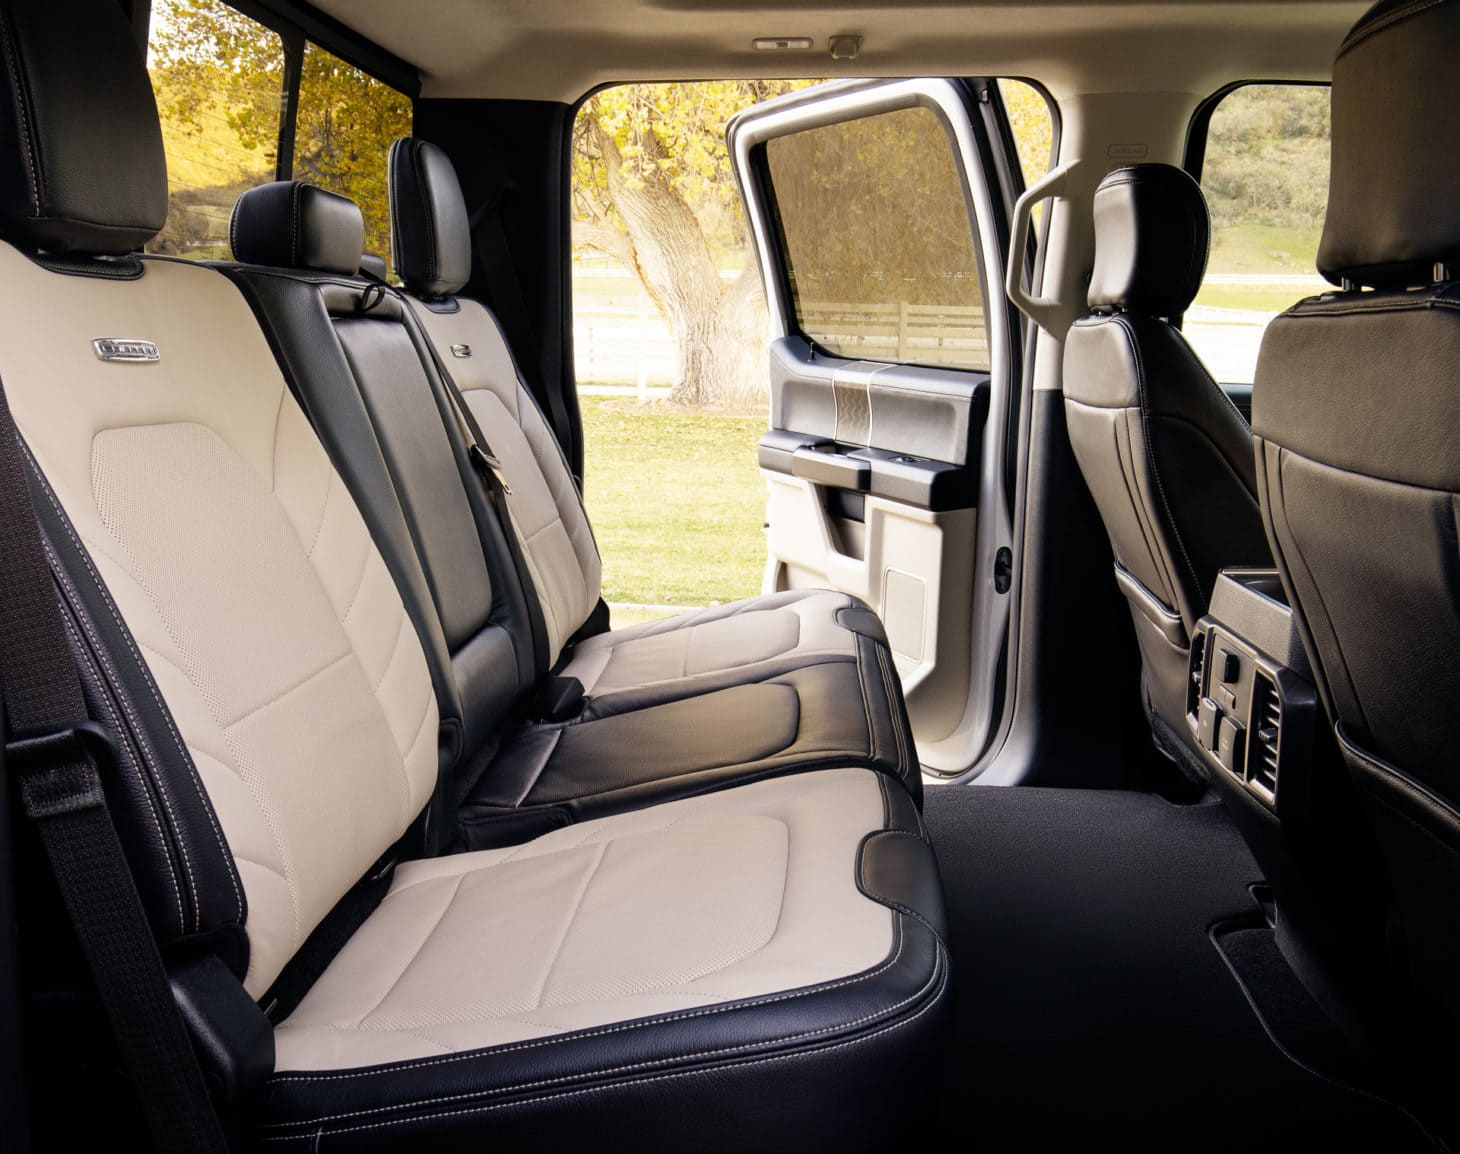 Interior cab of a pickup truck with leather seats and leg room